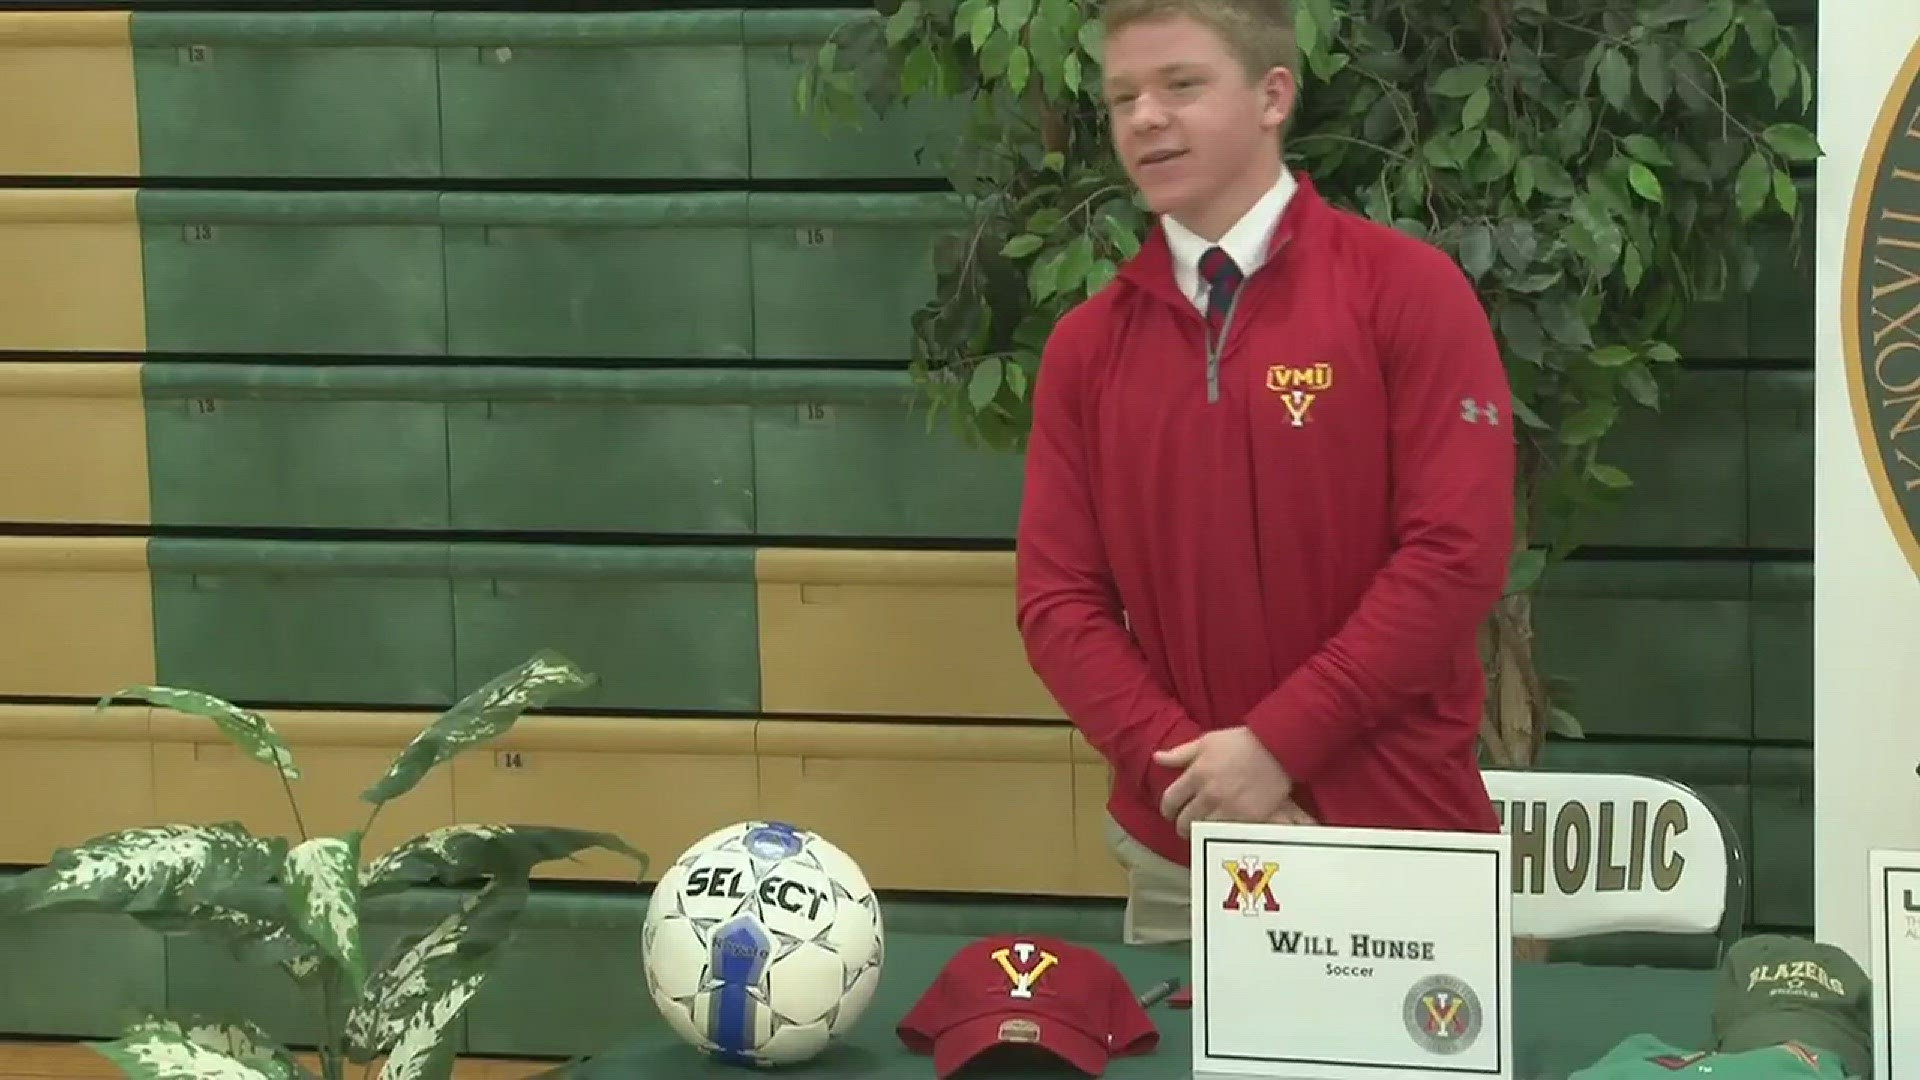 Hunse looks forward to playing soccer for VMI.